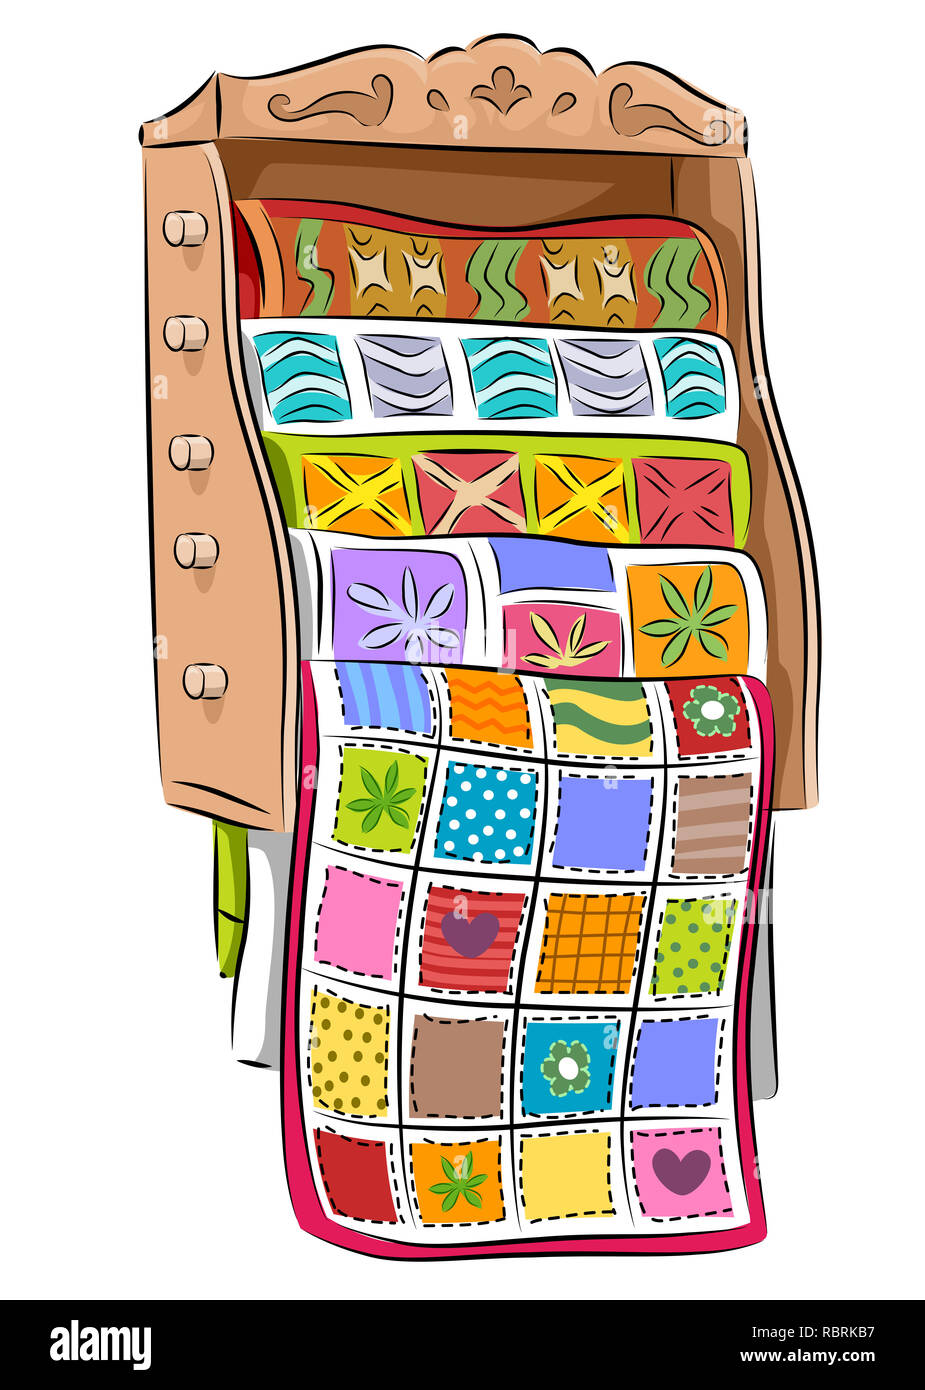 Illustration of a Quilt Rack Full of Quilts with Different Colors and Patterns Stock Photo